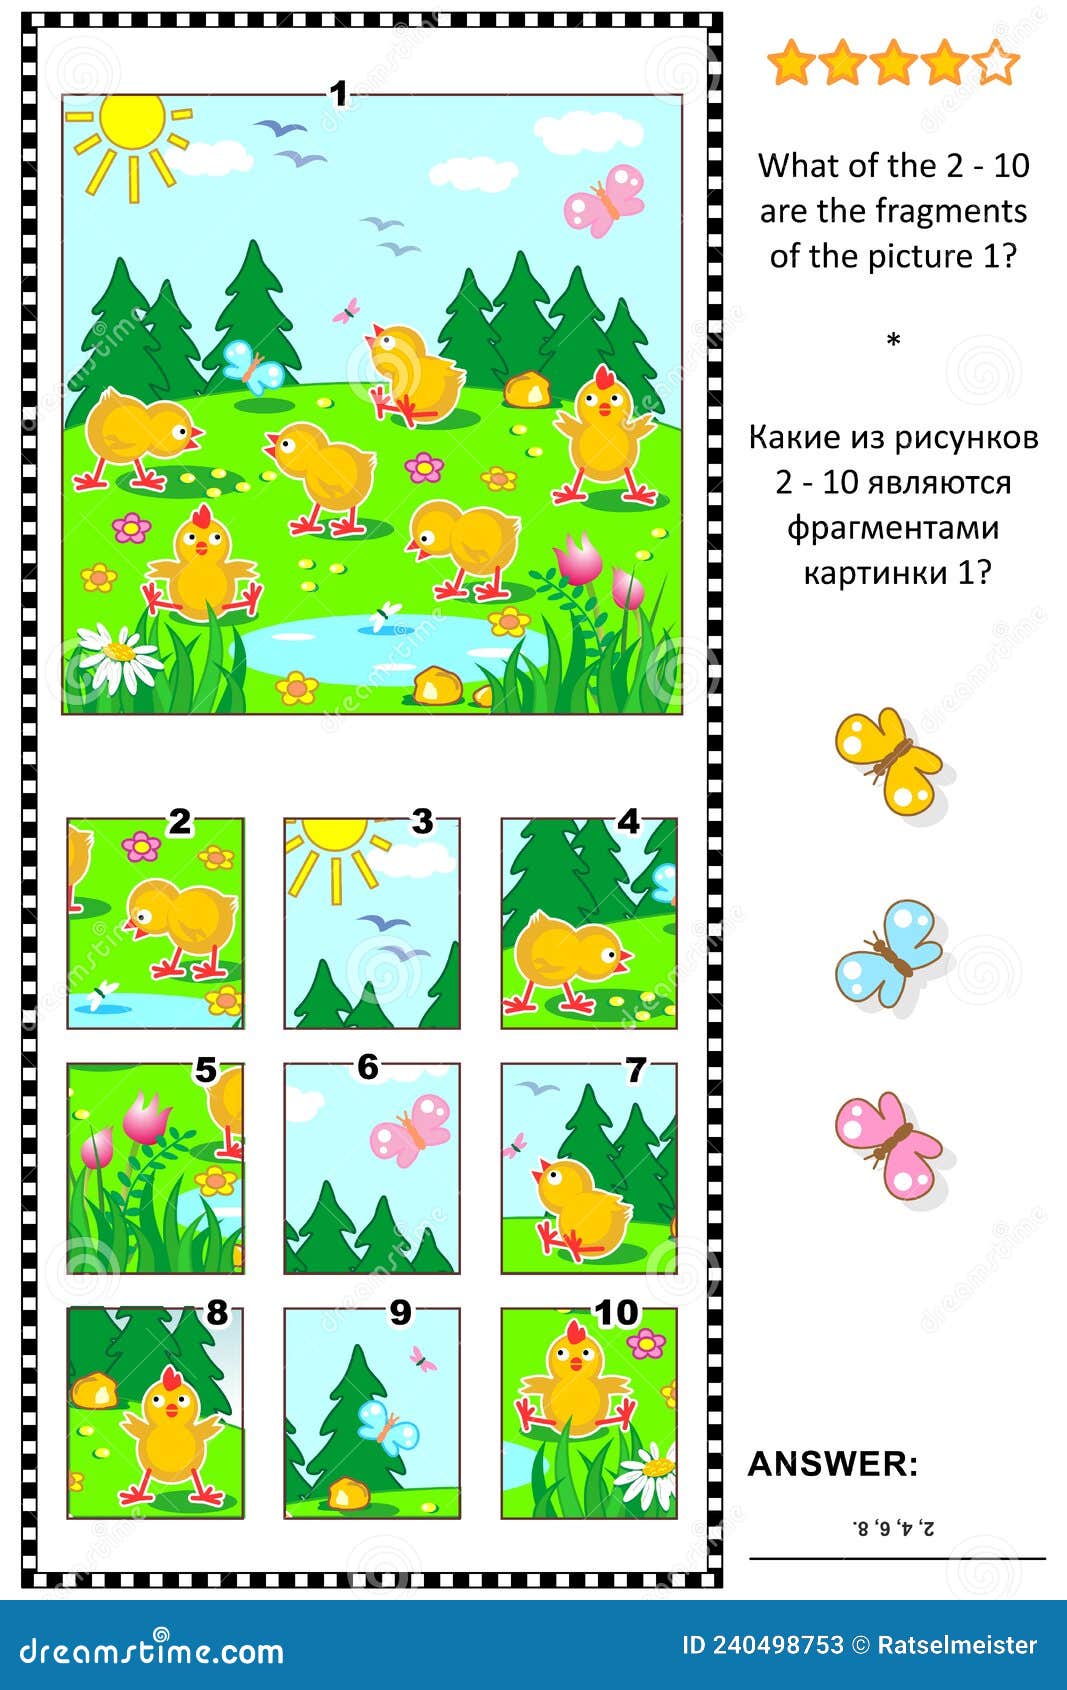 visual logic puzzle with happy playful chicks feeding outdoor: what of the 2 - 10 are the fragments of the picture 1? answer inclu